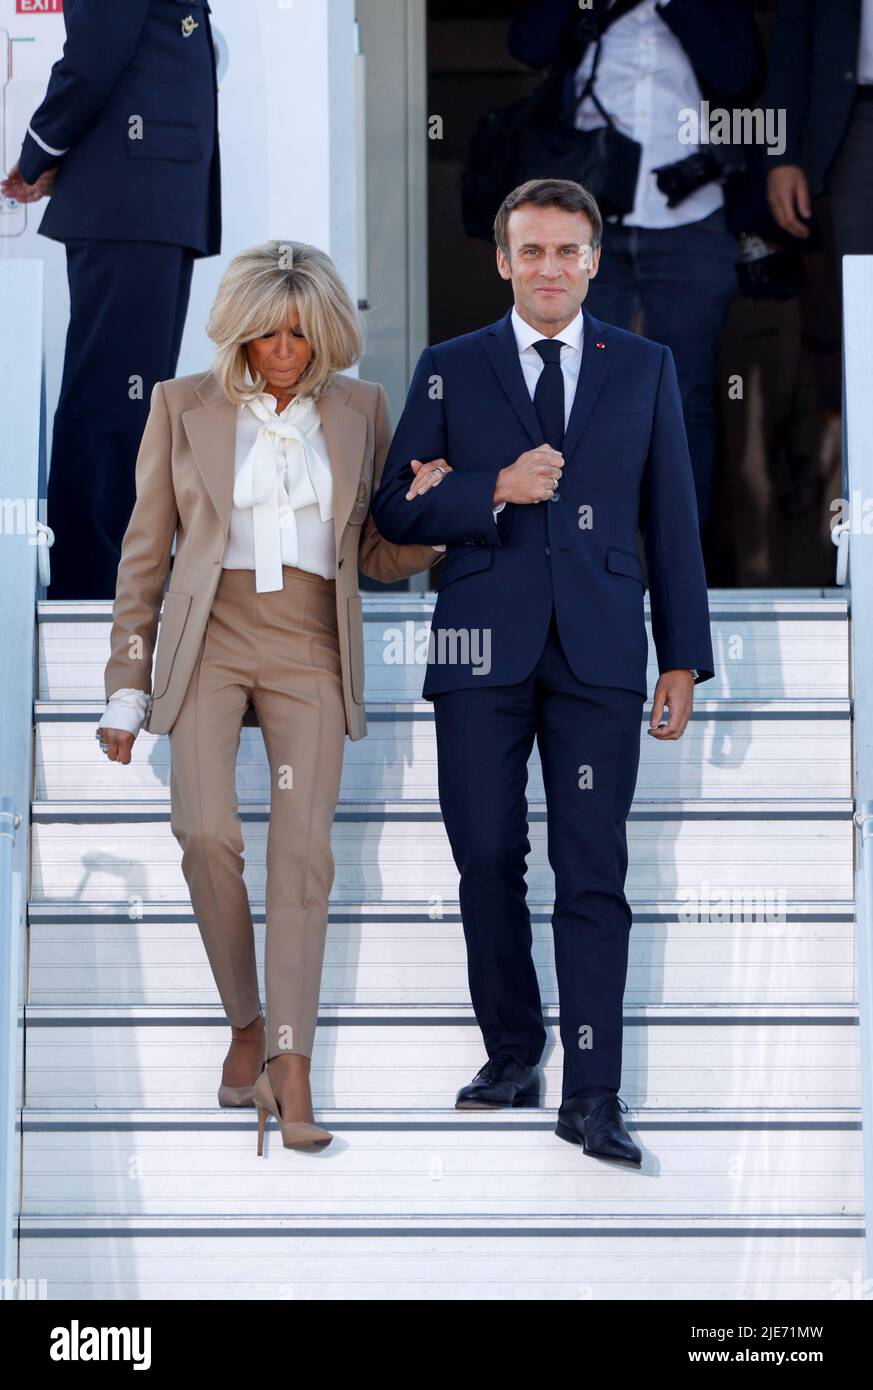 French President Emmanuel Macron and his wife Brigitte Macron exit an airplane as they arrive at Franz-Josef-Strauss airport in Munich ahead of the G7 summit, which will take place in the Bavarian alpine resort of Elmau Castle, Germany, June 25, 2022. REUTERS/Michaela Rehle Stock Photo